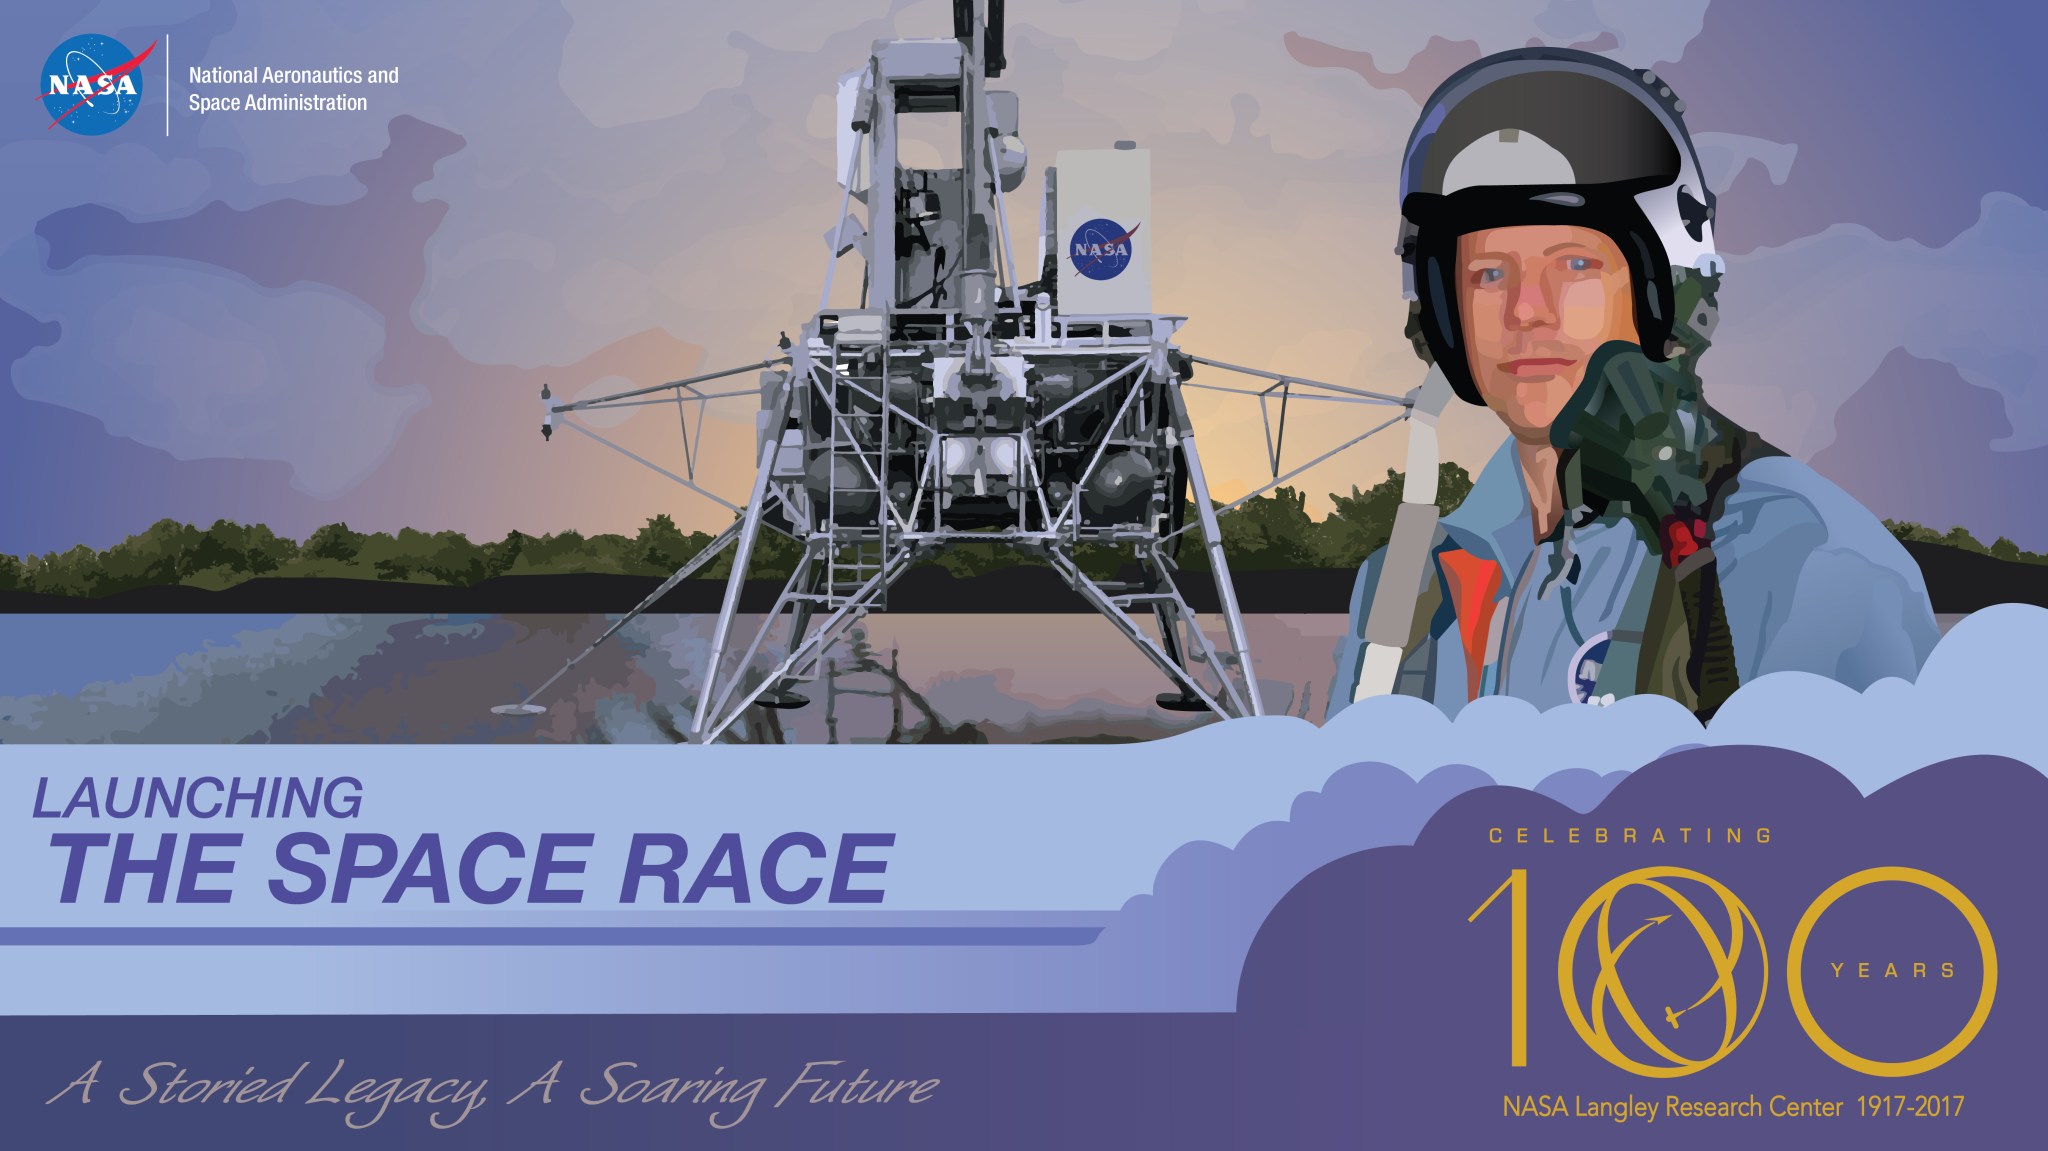 This is a vector graphic of Astronaut Neil Armstrong standing in front of a lunar lander. There is text in the image that reads "The Space Race" and "A Storied Legacy, A Soaring Future."